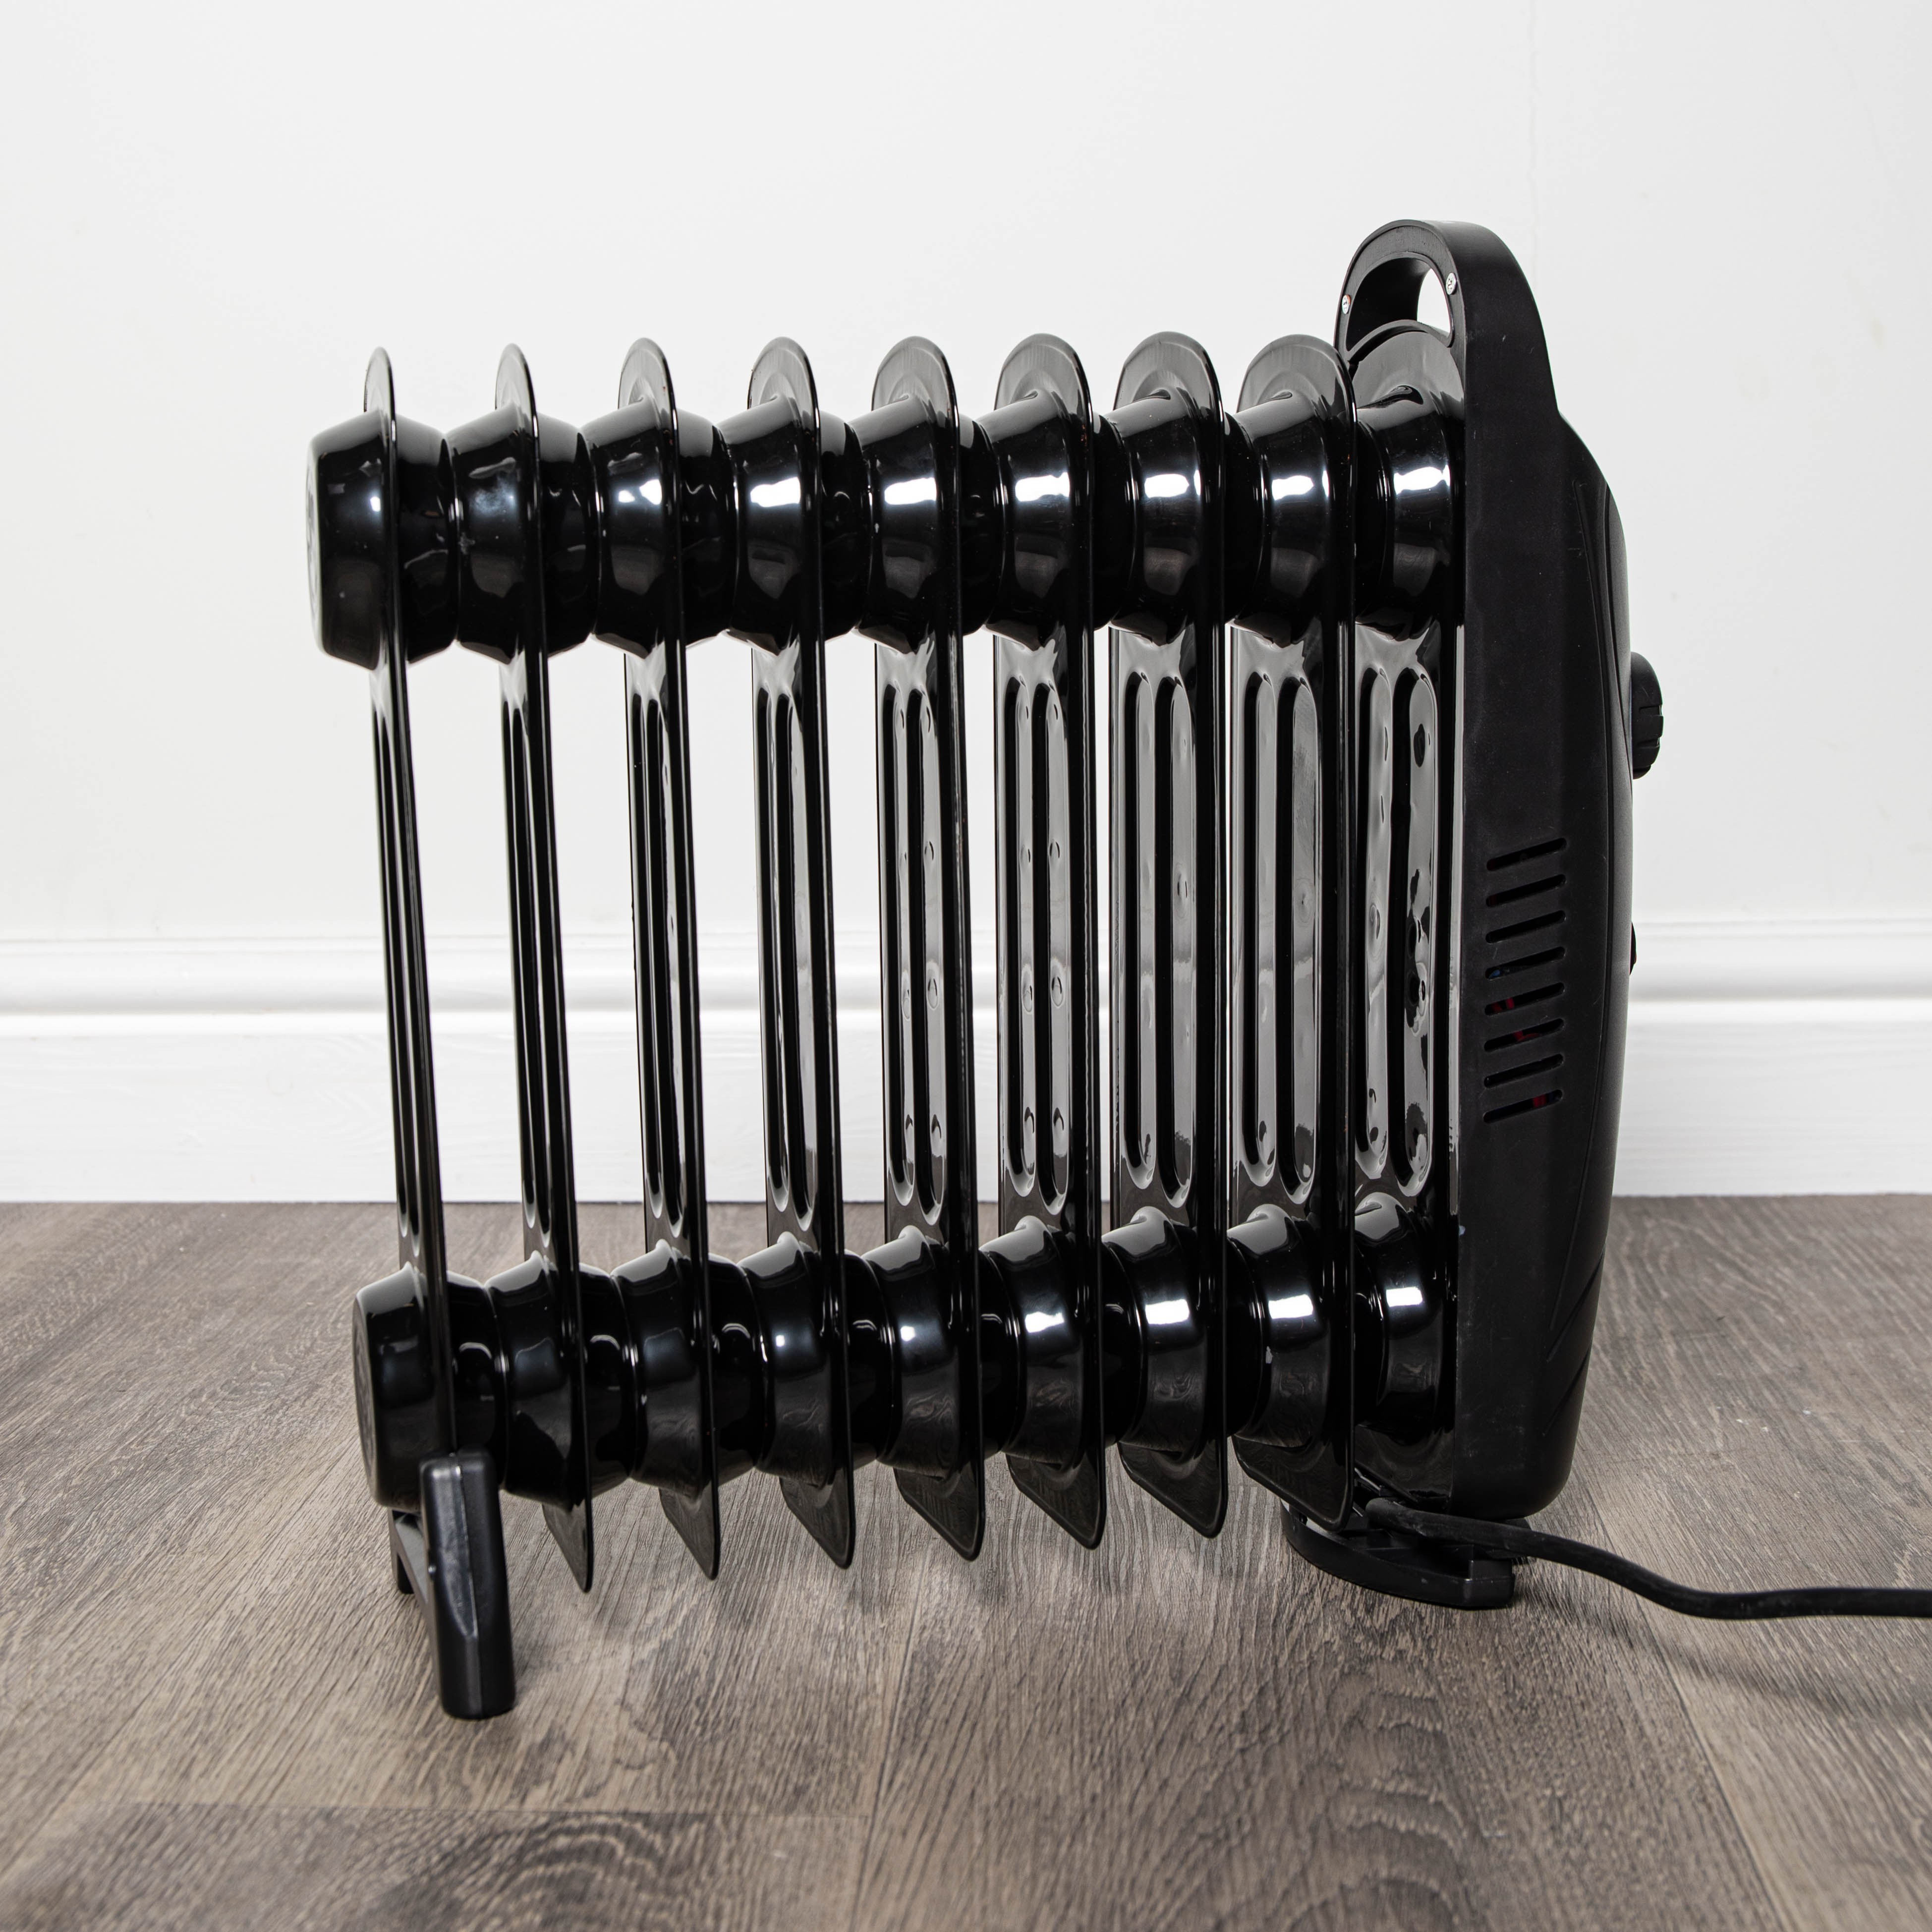 1Kw (1,000w) 9 Fin Black Oil Filled Radiator / Heater with Adjustable Thermostat